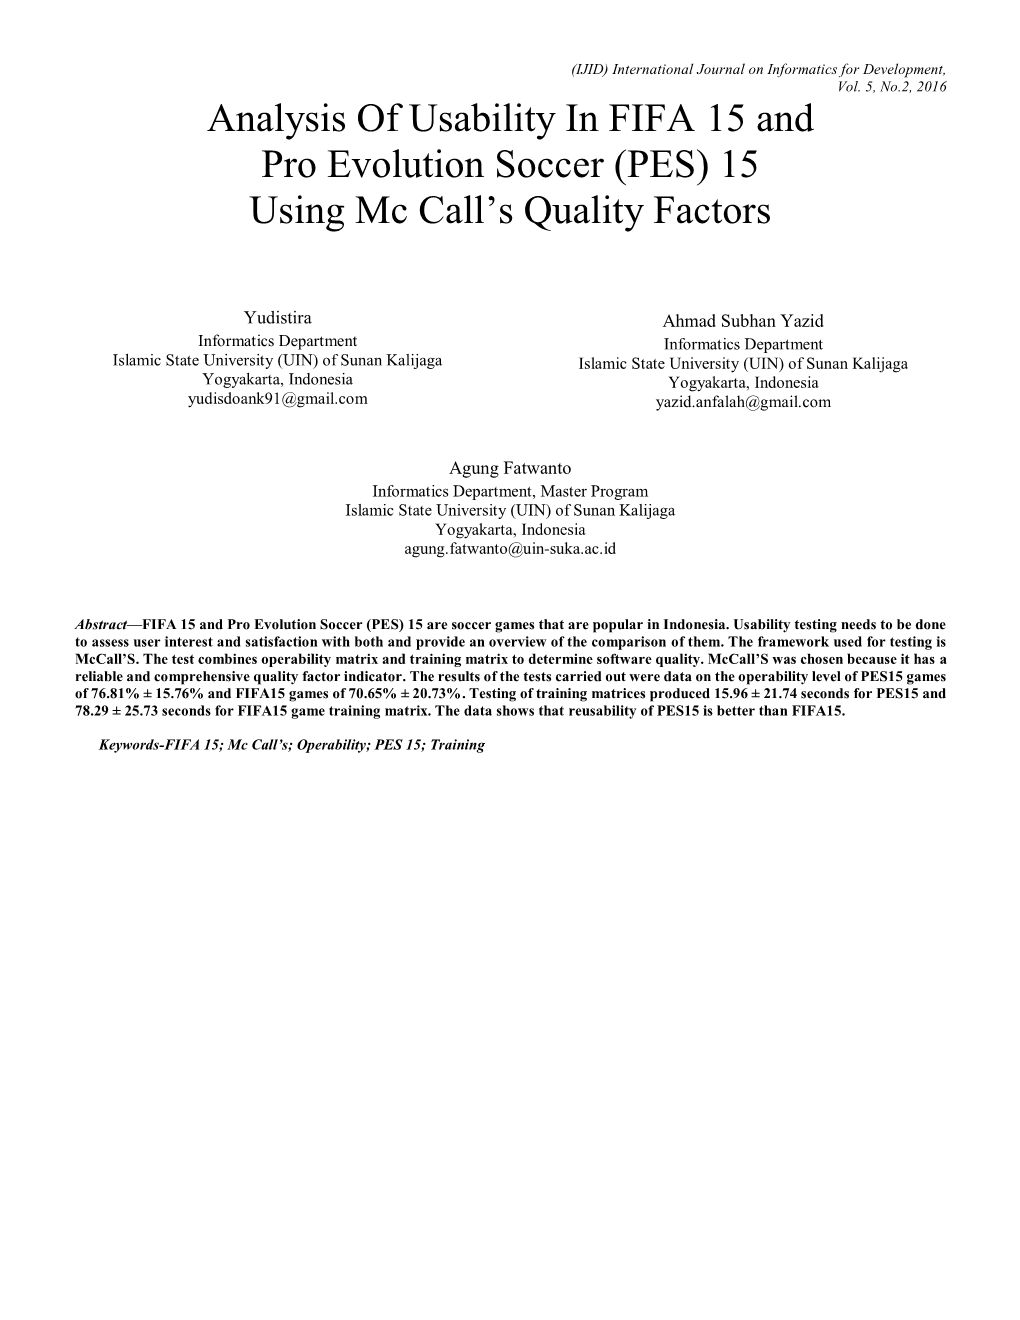 Analysis of Usability in FIFA 15 and Pro Evolution Soccer (PES) 15 Using Mc Call’S Quality Factors